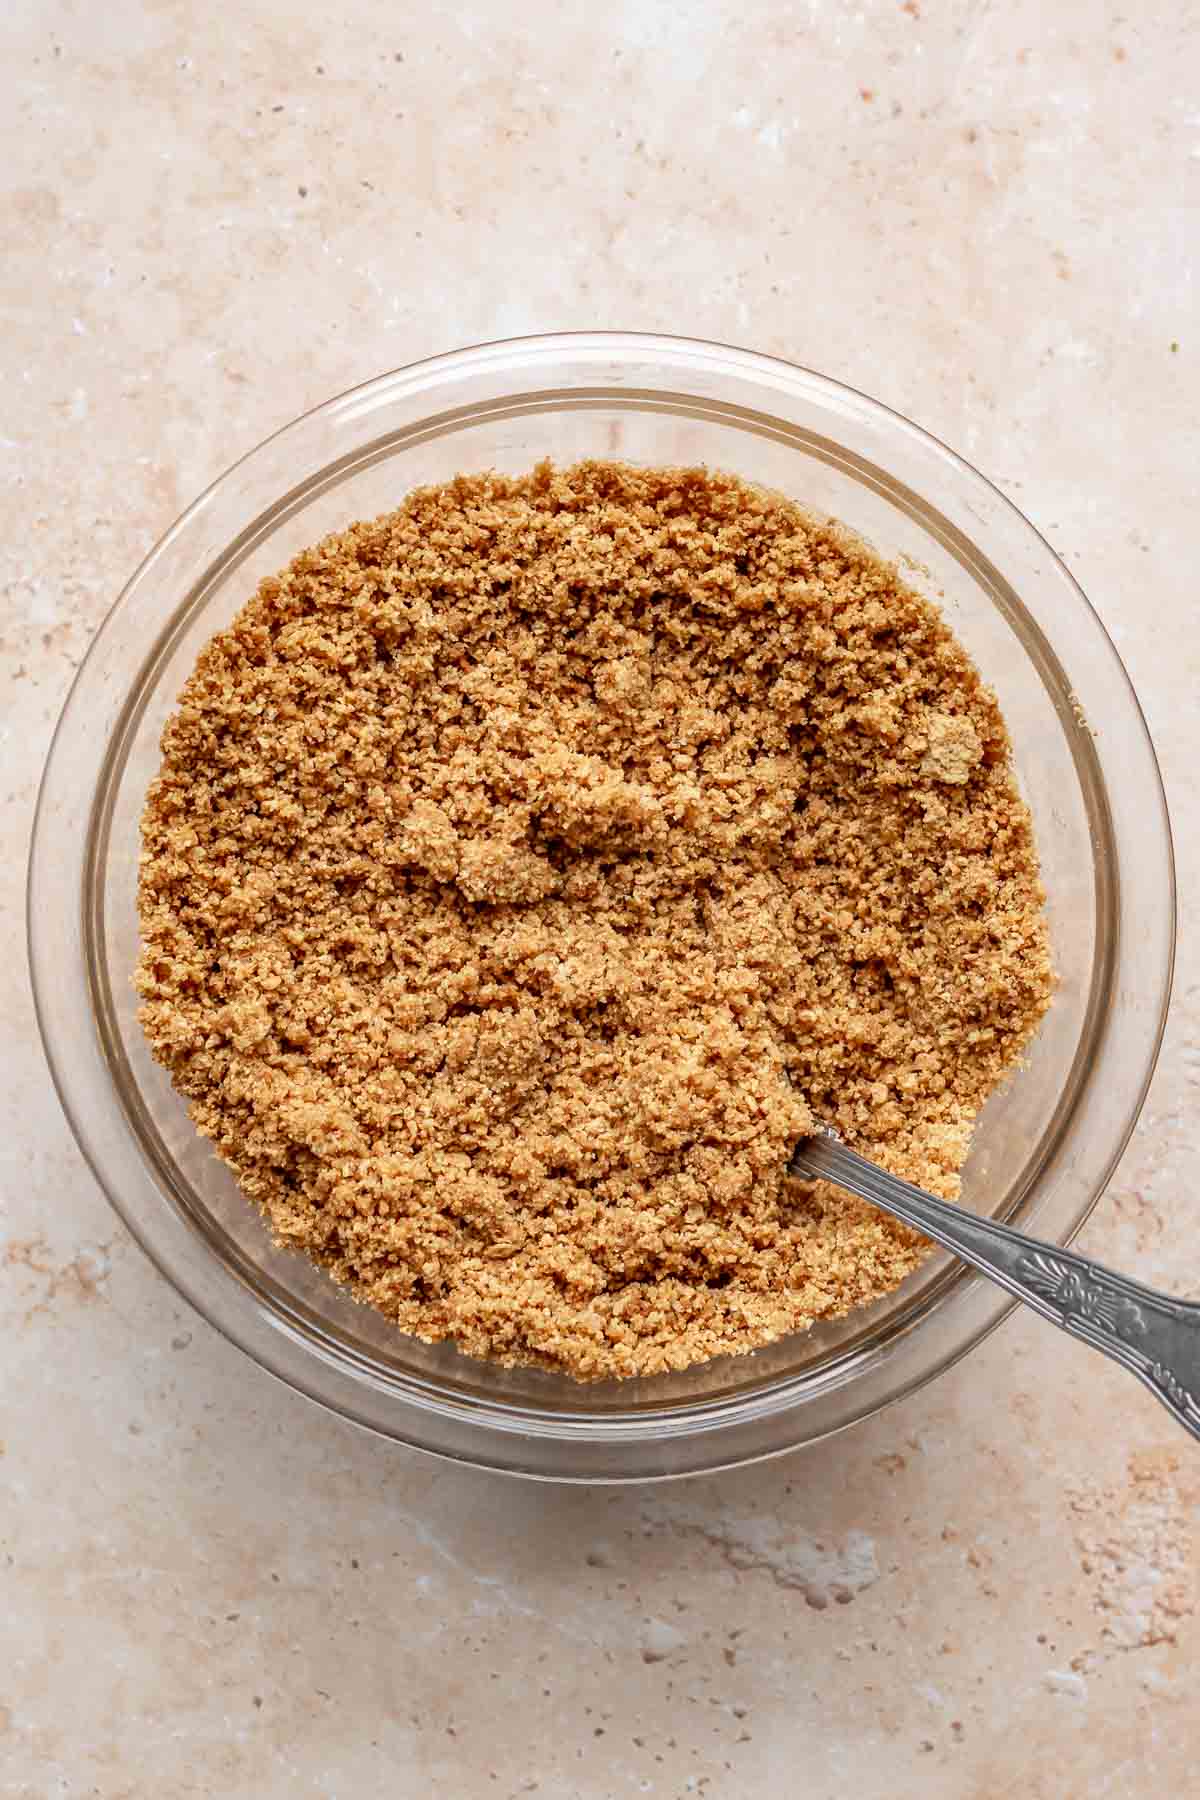 Graham cracker crumbs mixed in a bowl with a fork.